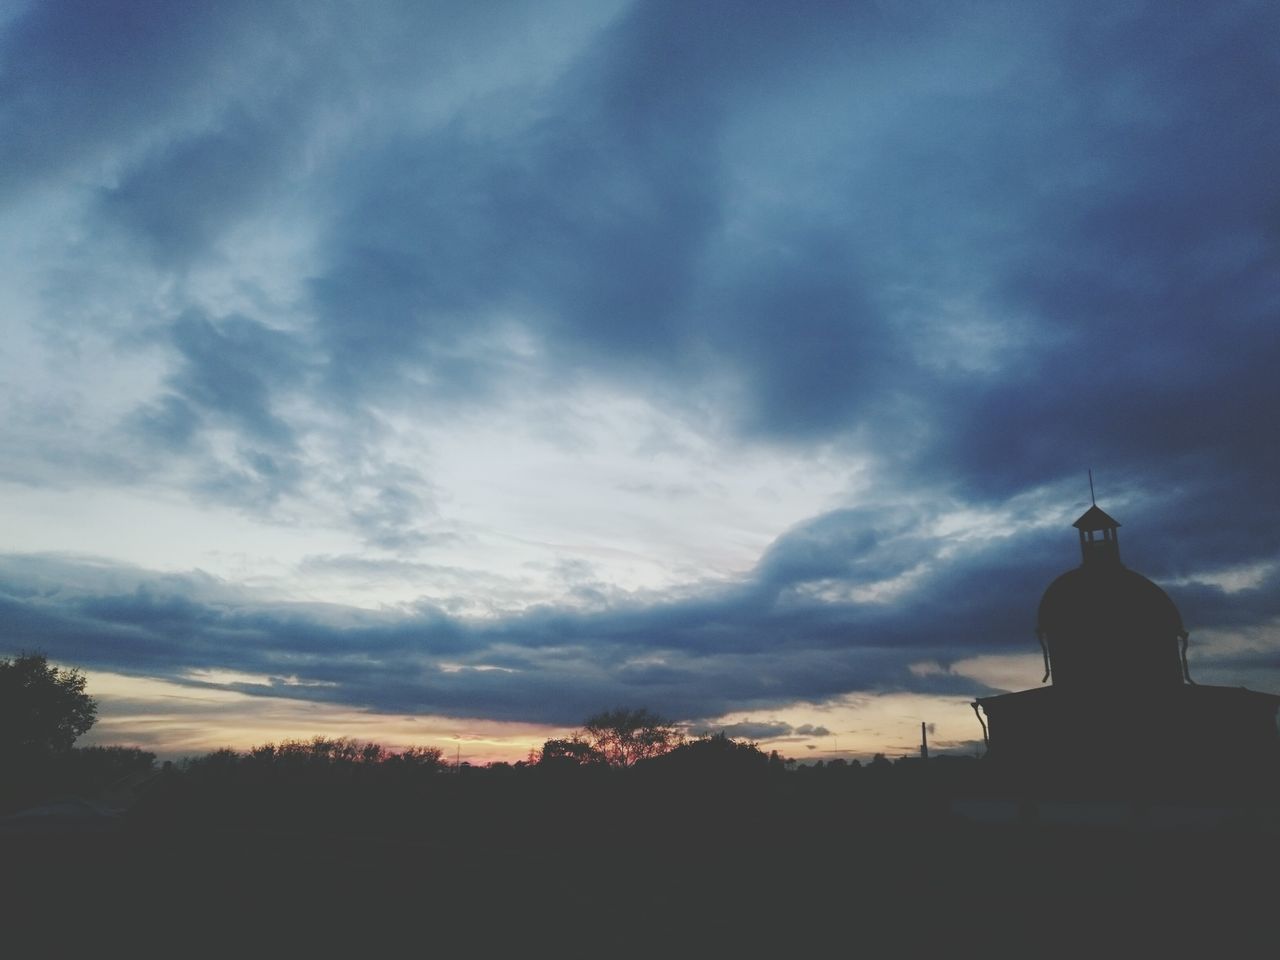 silhouette, sky, sunset, cloud - sky, built structure, architecture, building exterior, low angle view, dusk, cloud, cloudy, nature, outdoors, tree, tranquility, beauty in nature, scenics, no people, tranquil scene, outline